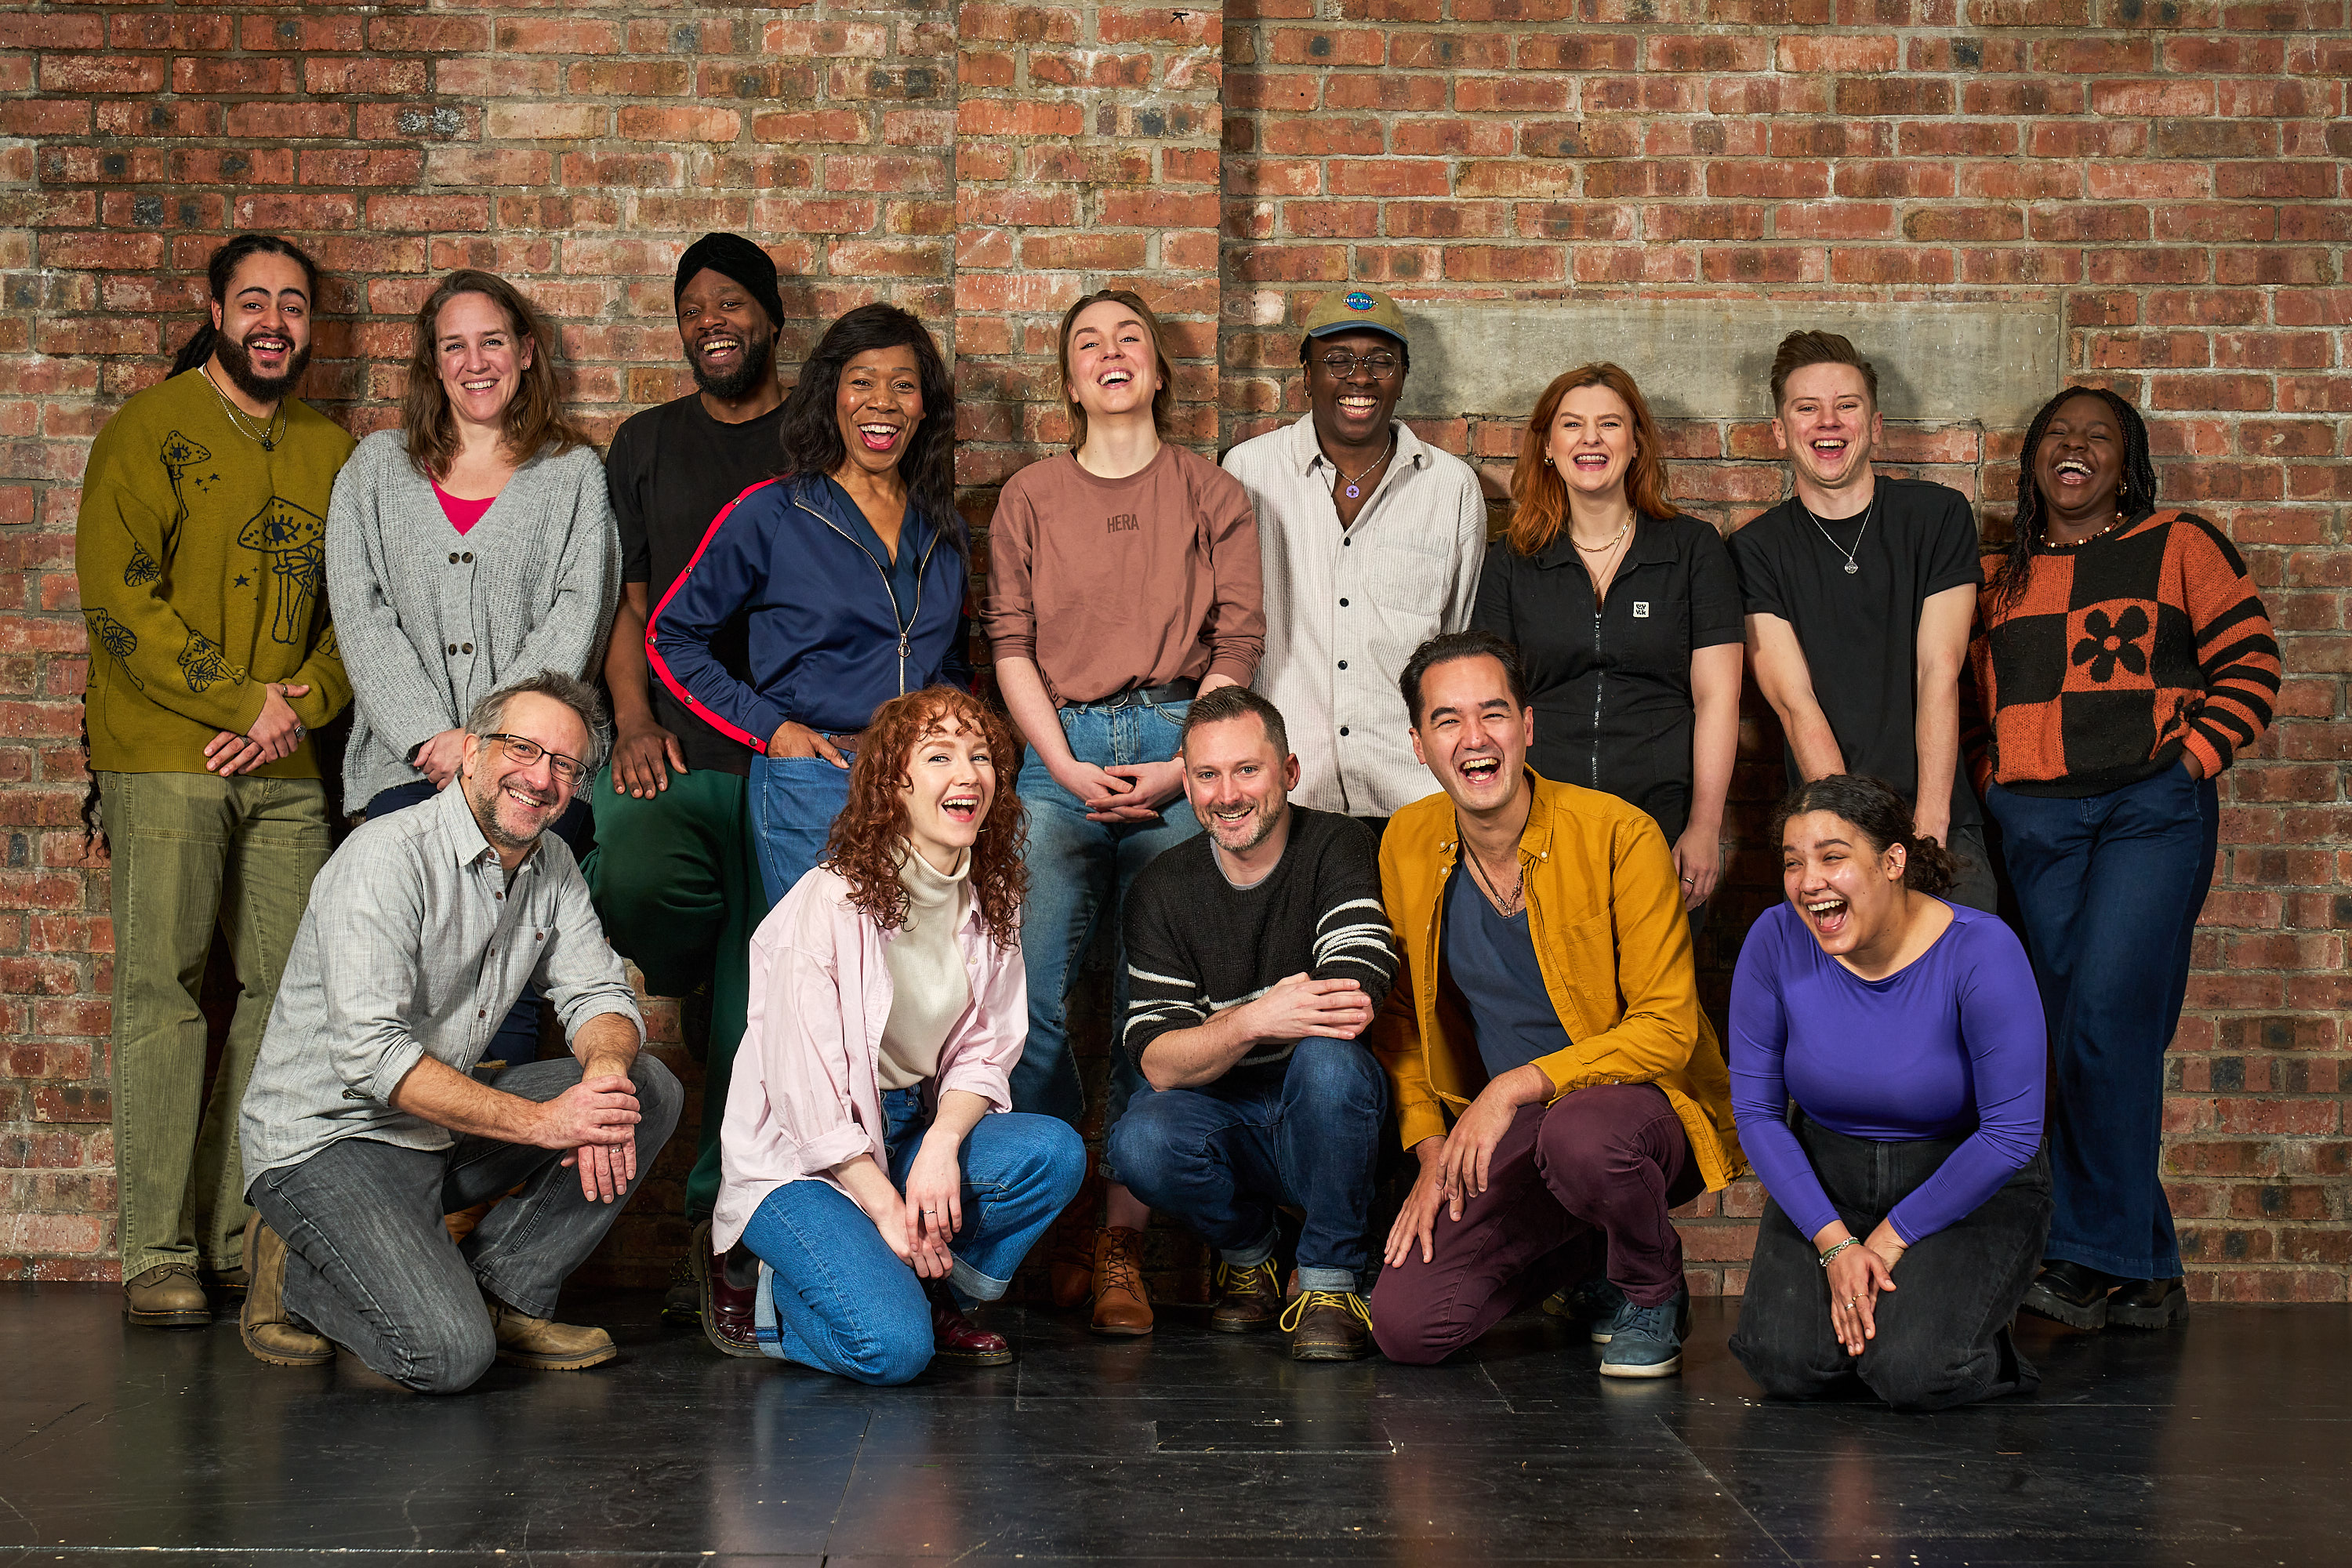 The cast of Beautiful: The Carole King Musical